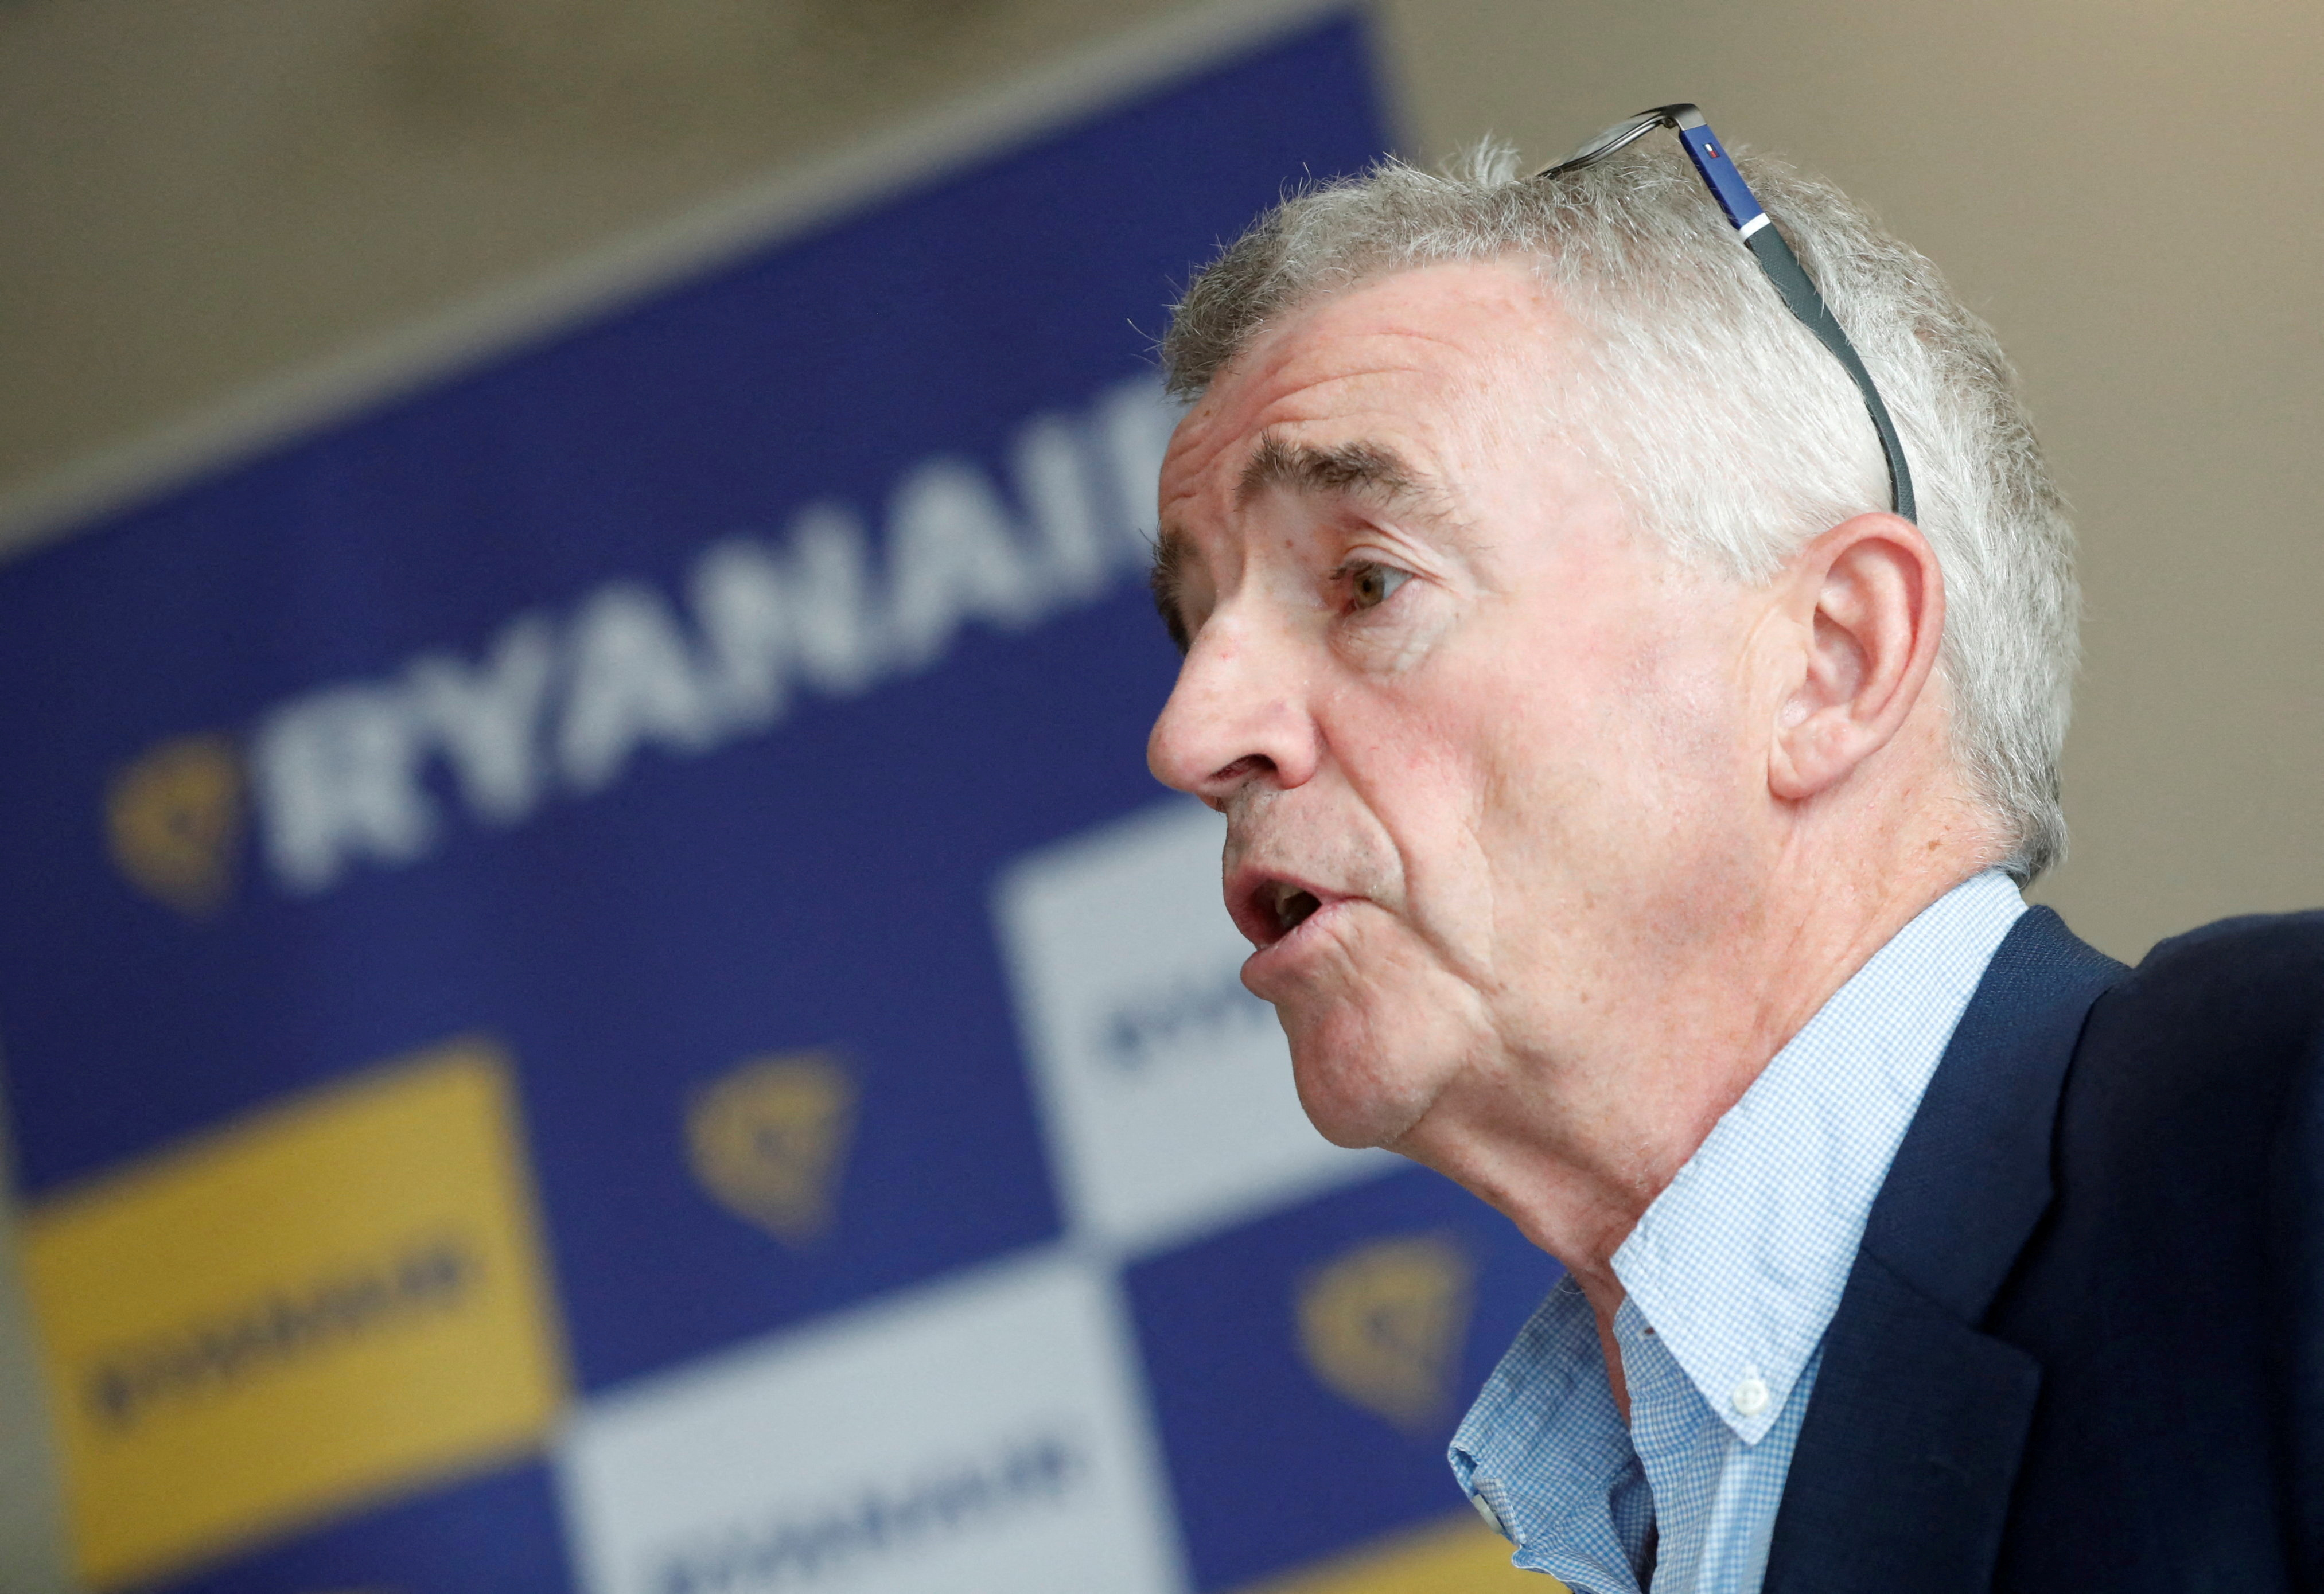 Ryanair boss Michael O'Leary is "disappointed" with the delays